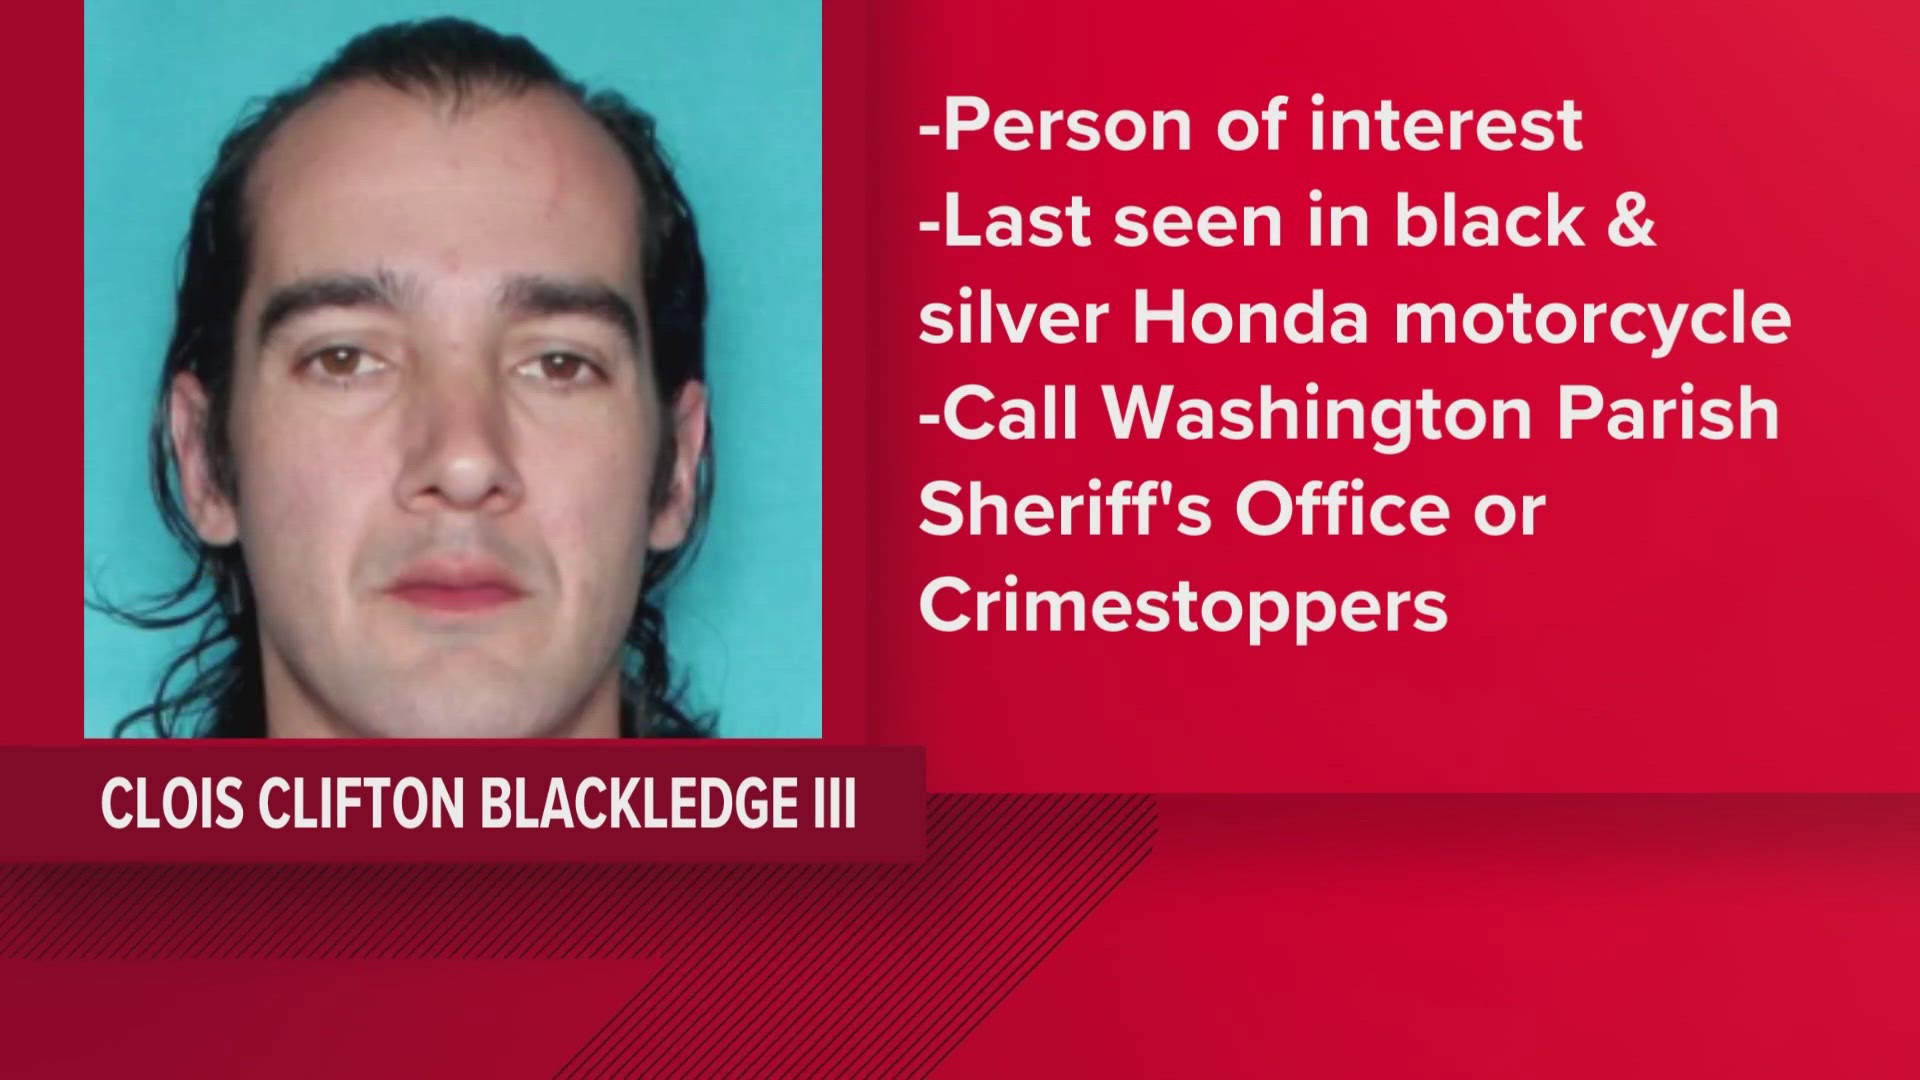 Washington Parish Sheriff's Office is looking for Clois Clifton Blackledge III for questioning after a man was found shot to death on South Choctaw Road.